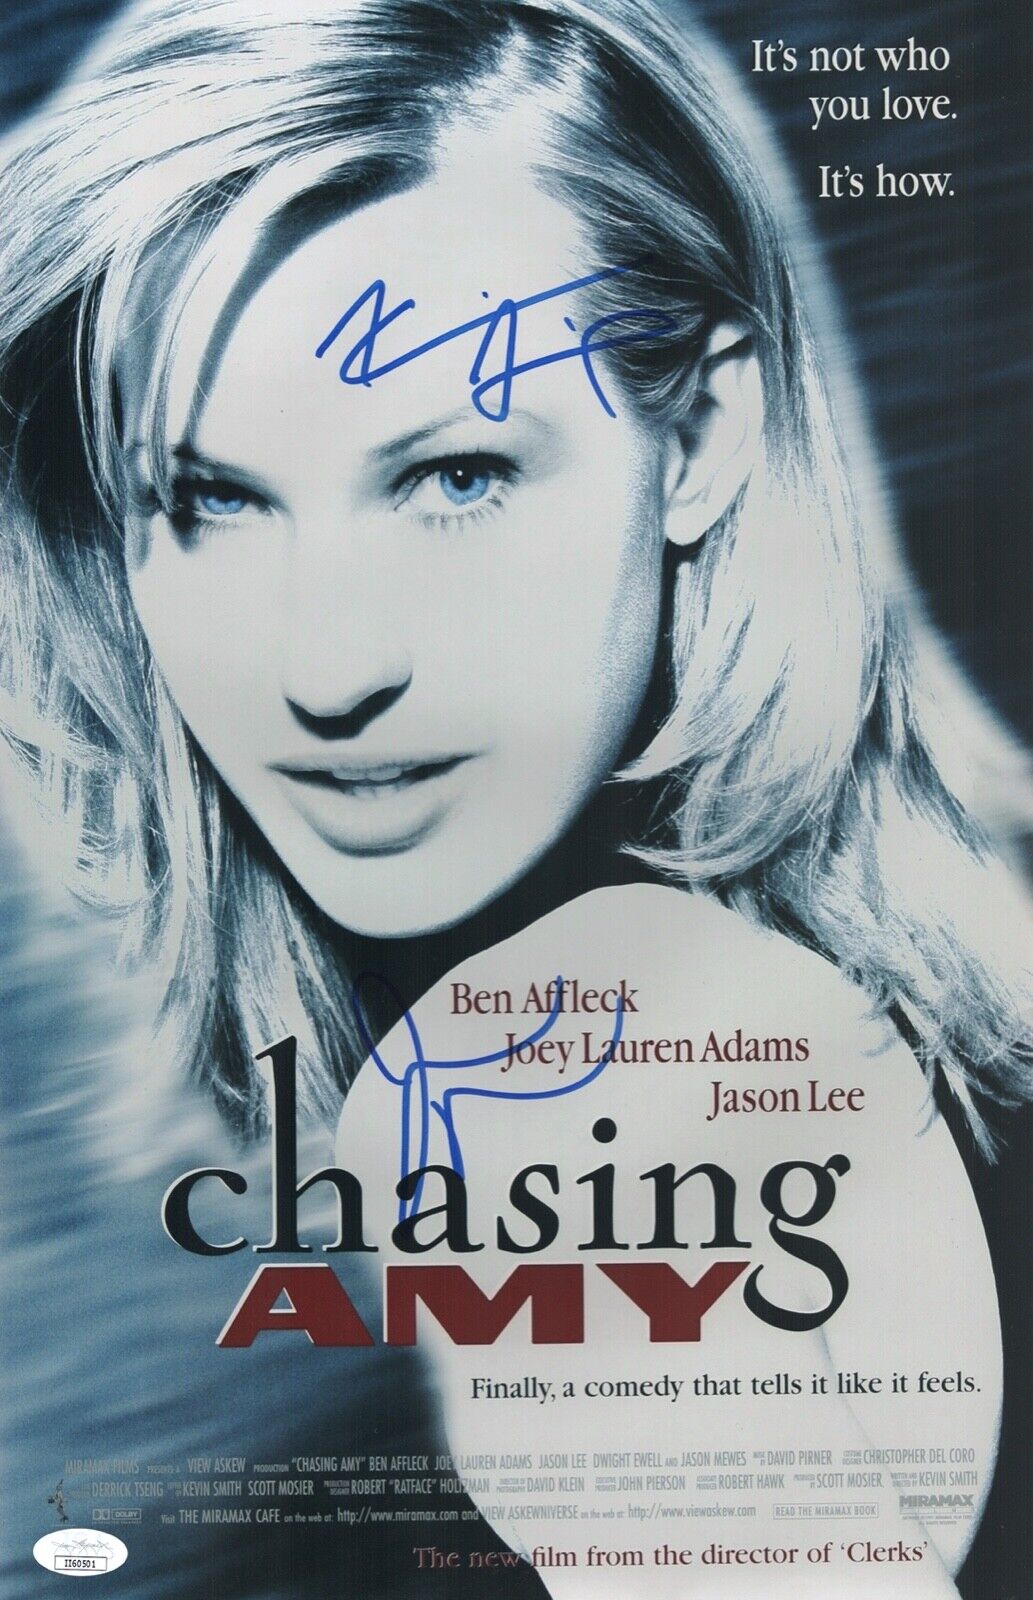 KEVIN SMITH & JASON MEWES Signed CHASING AMY 11x17 Photo Poster painting Autograph JSA COA Cert